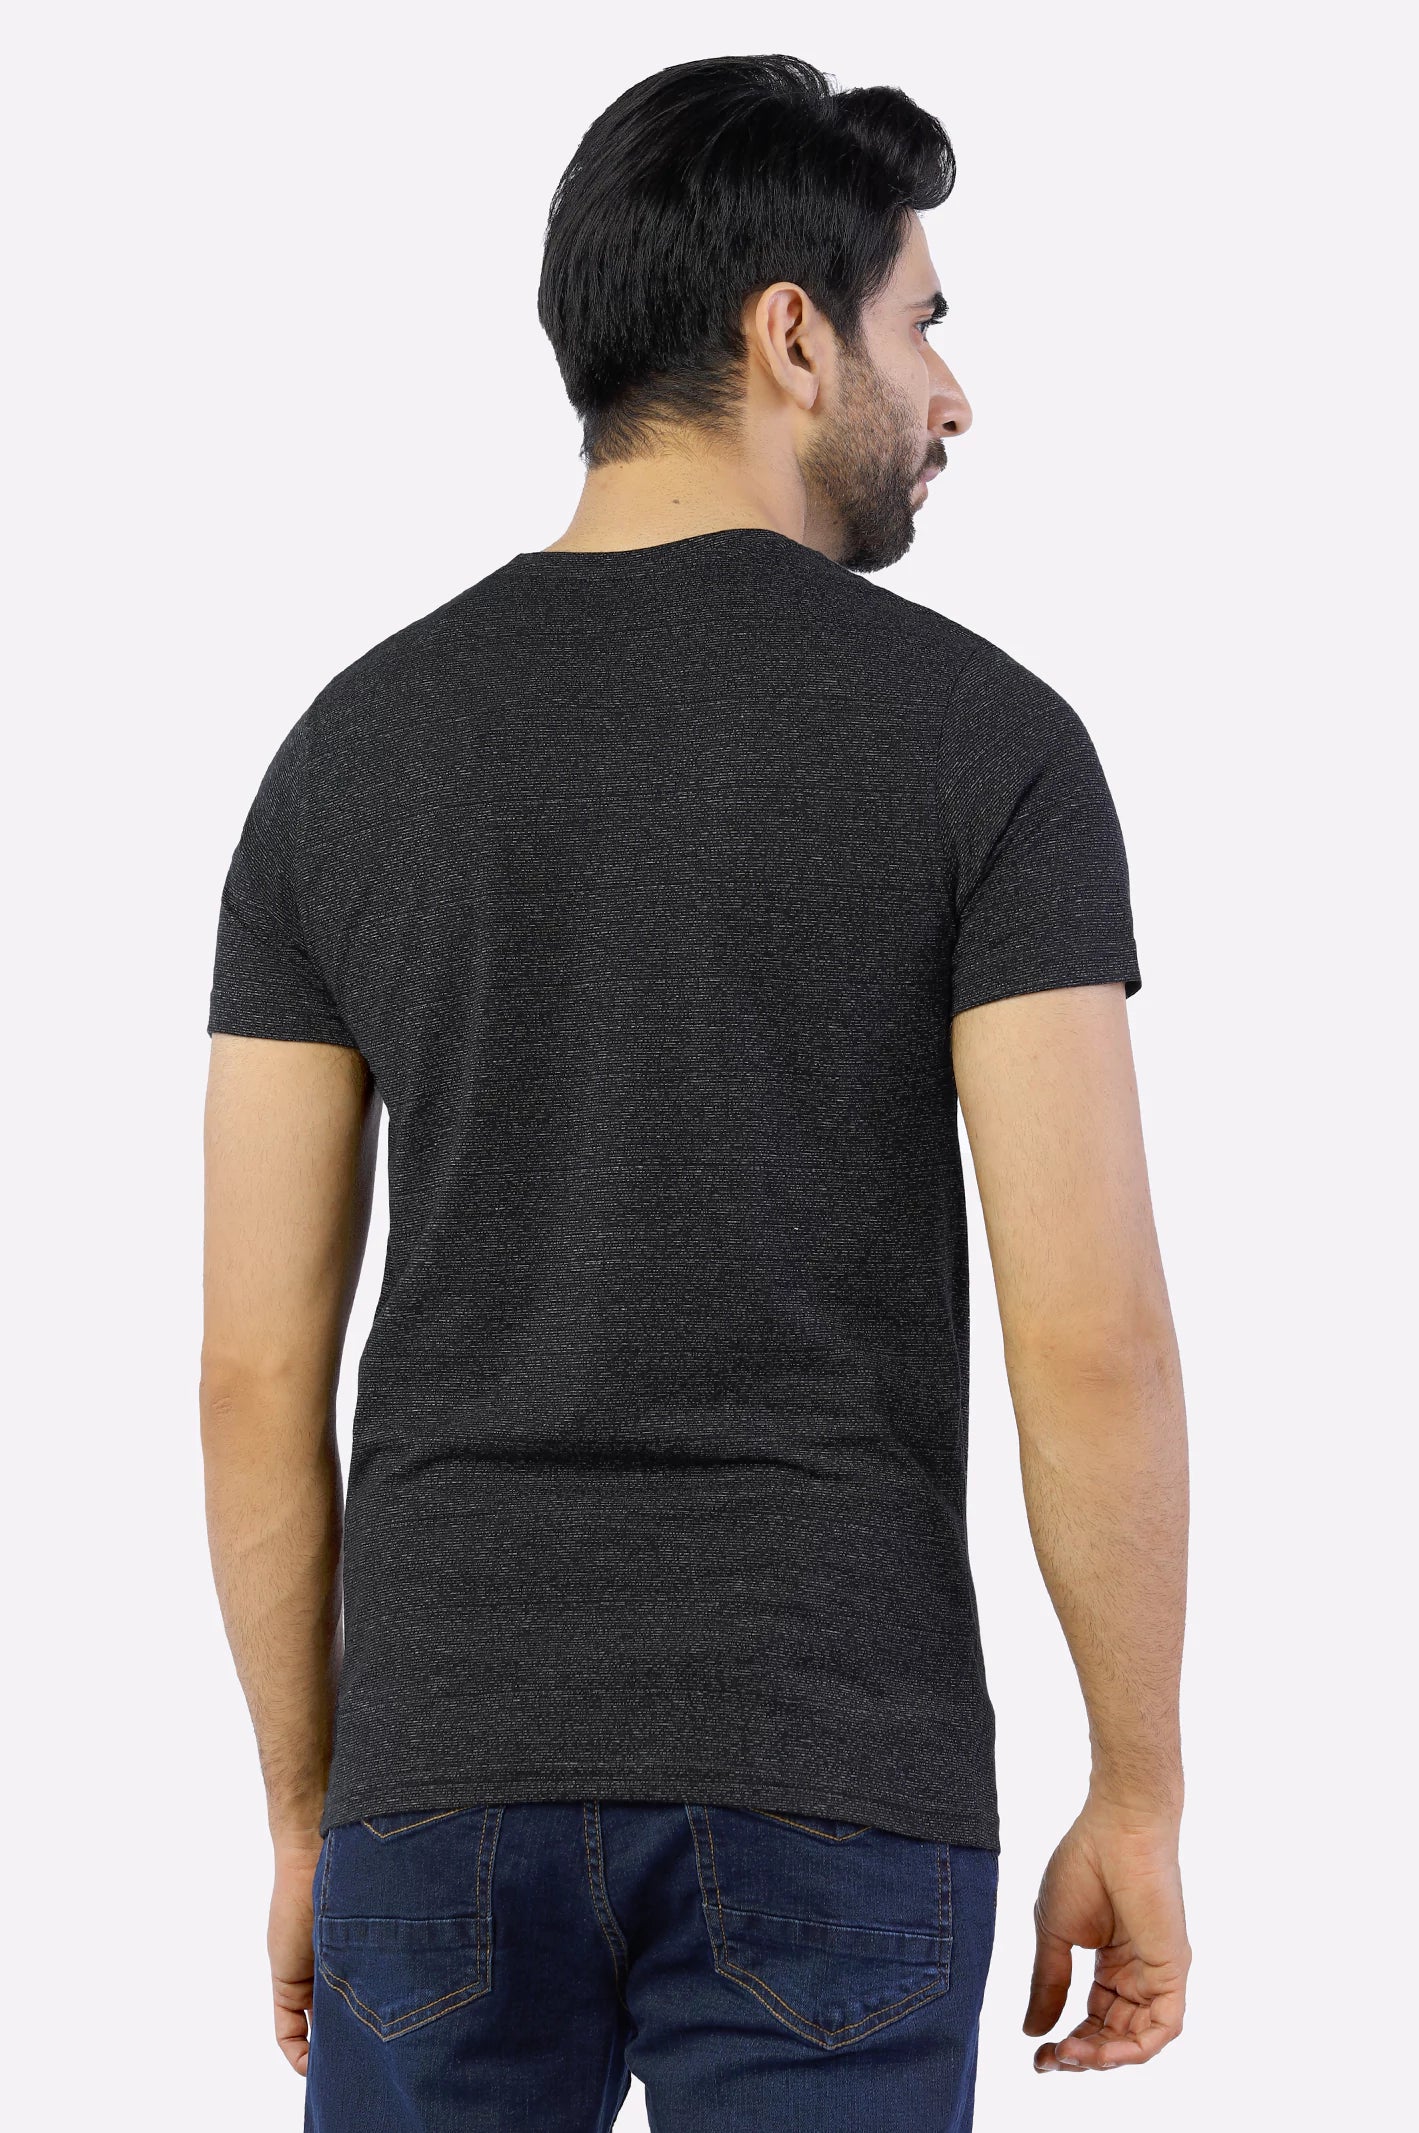 Black Basic Crew Neck T-Shirt From Diners